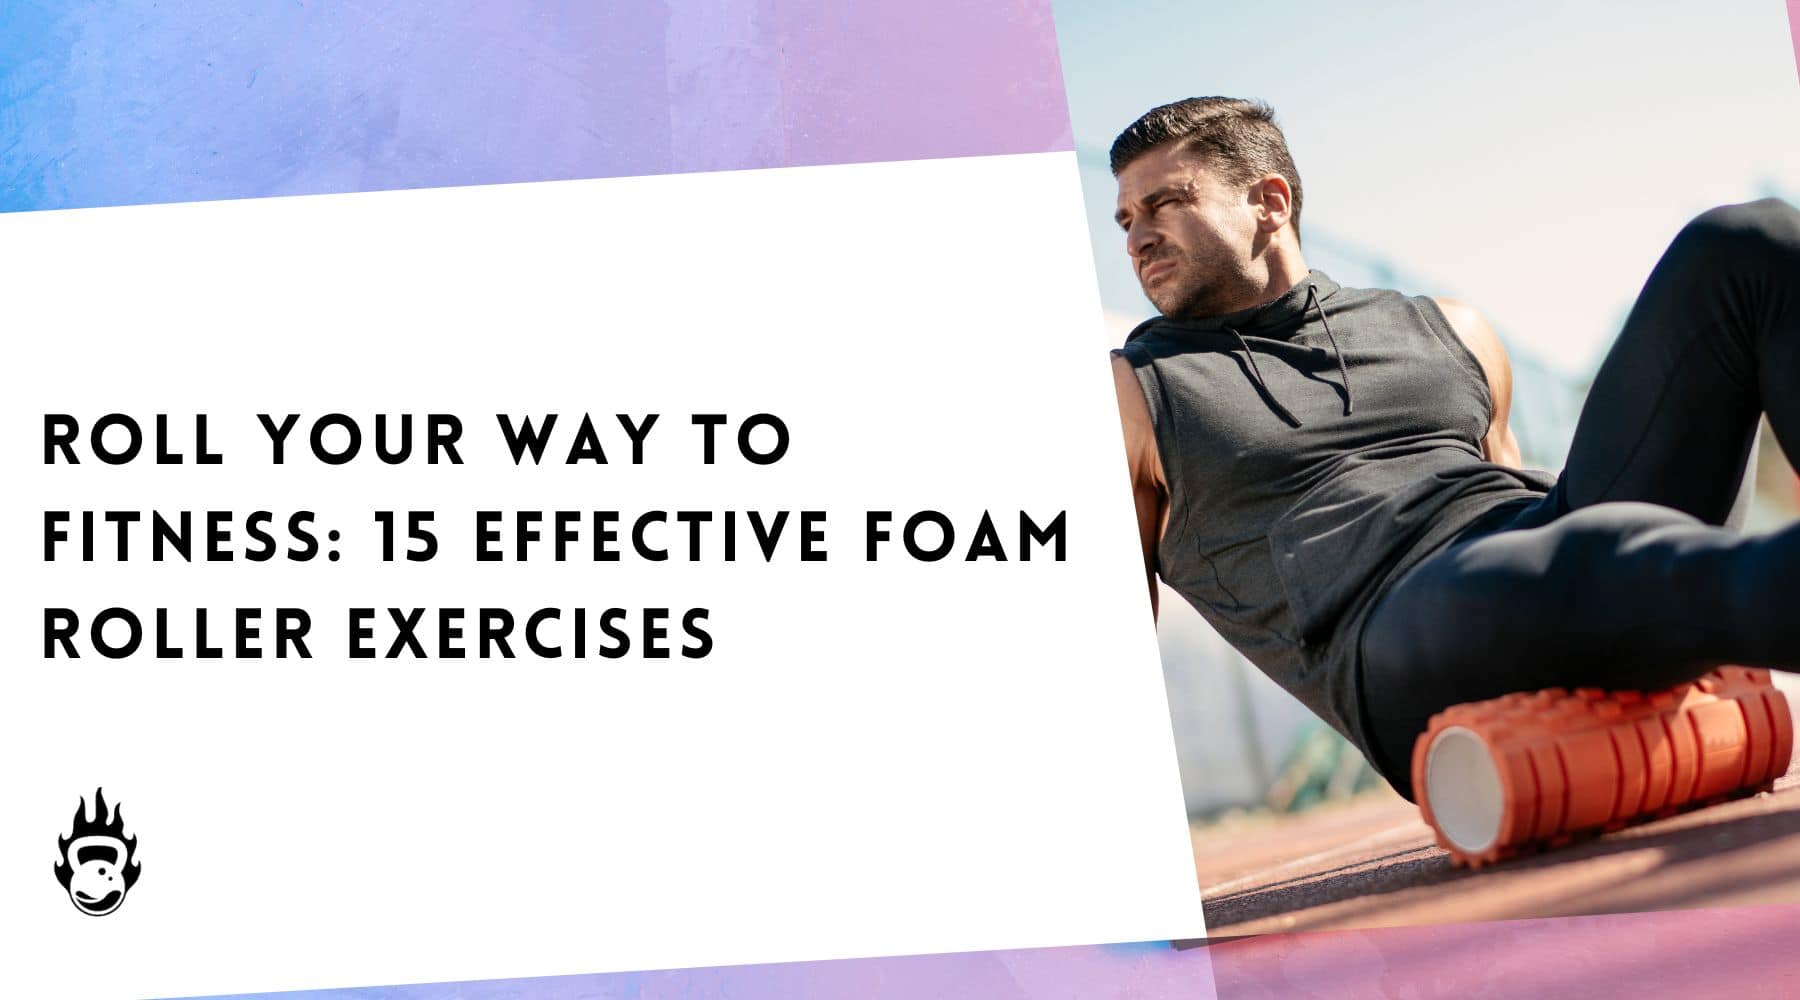 Roll Your Way to Fitness: 15 Effective Foam Roller Exercises